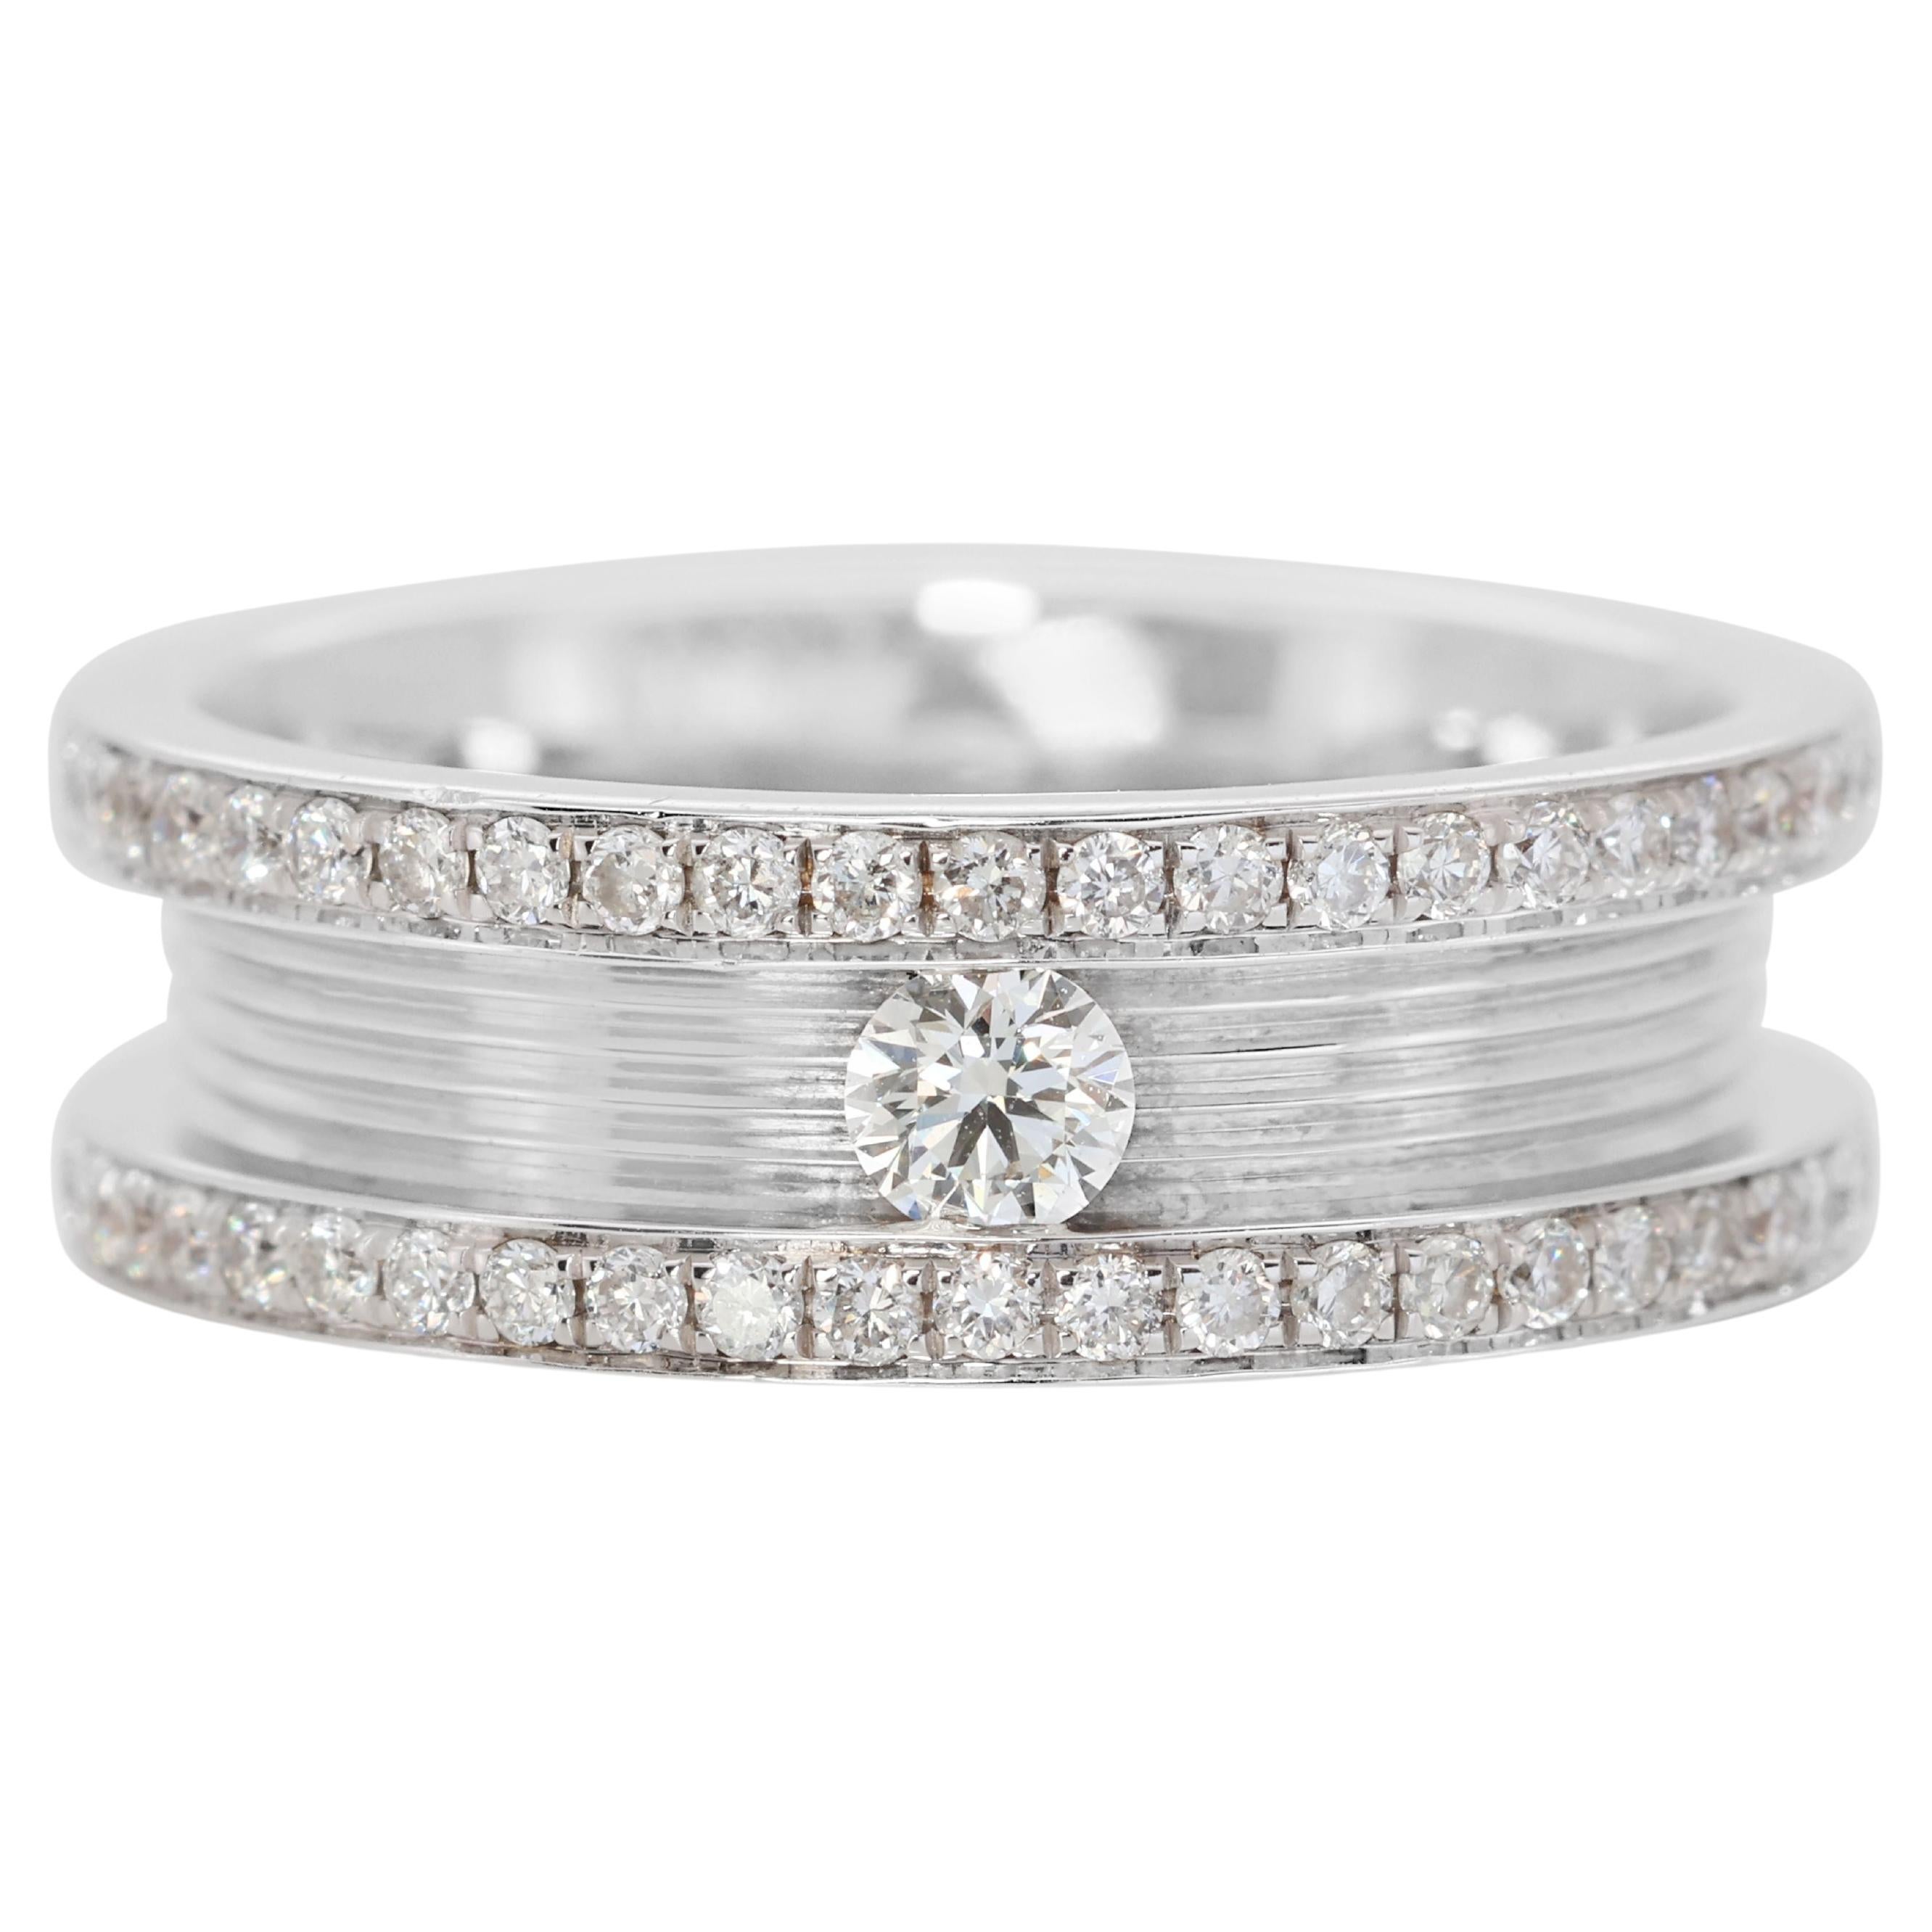 Dazzling 18K White Gold Ring with 0.55 ct Natural Diamonds